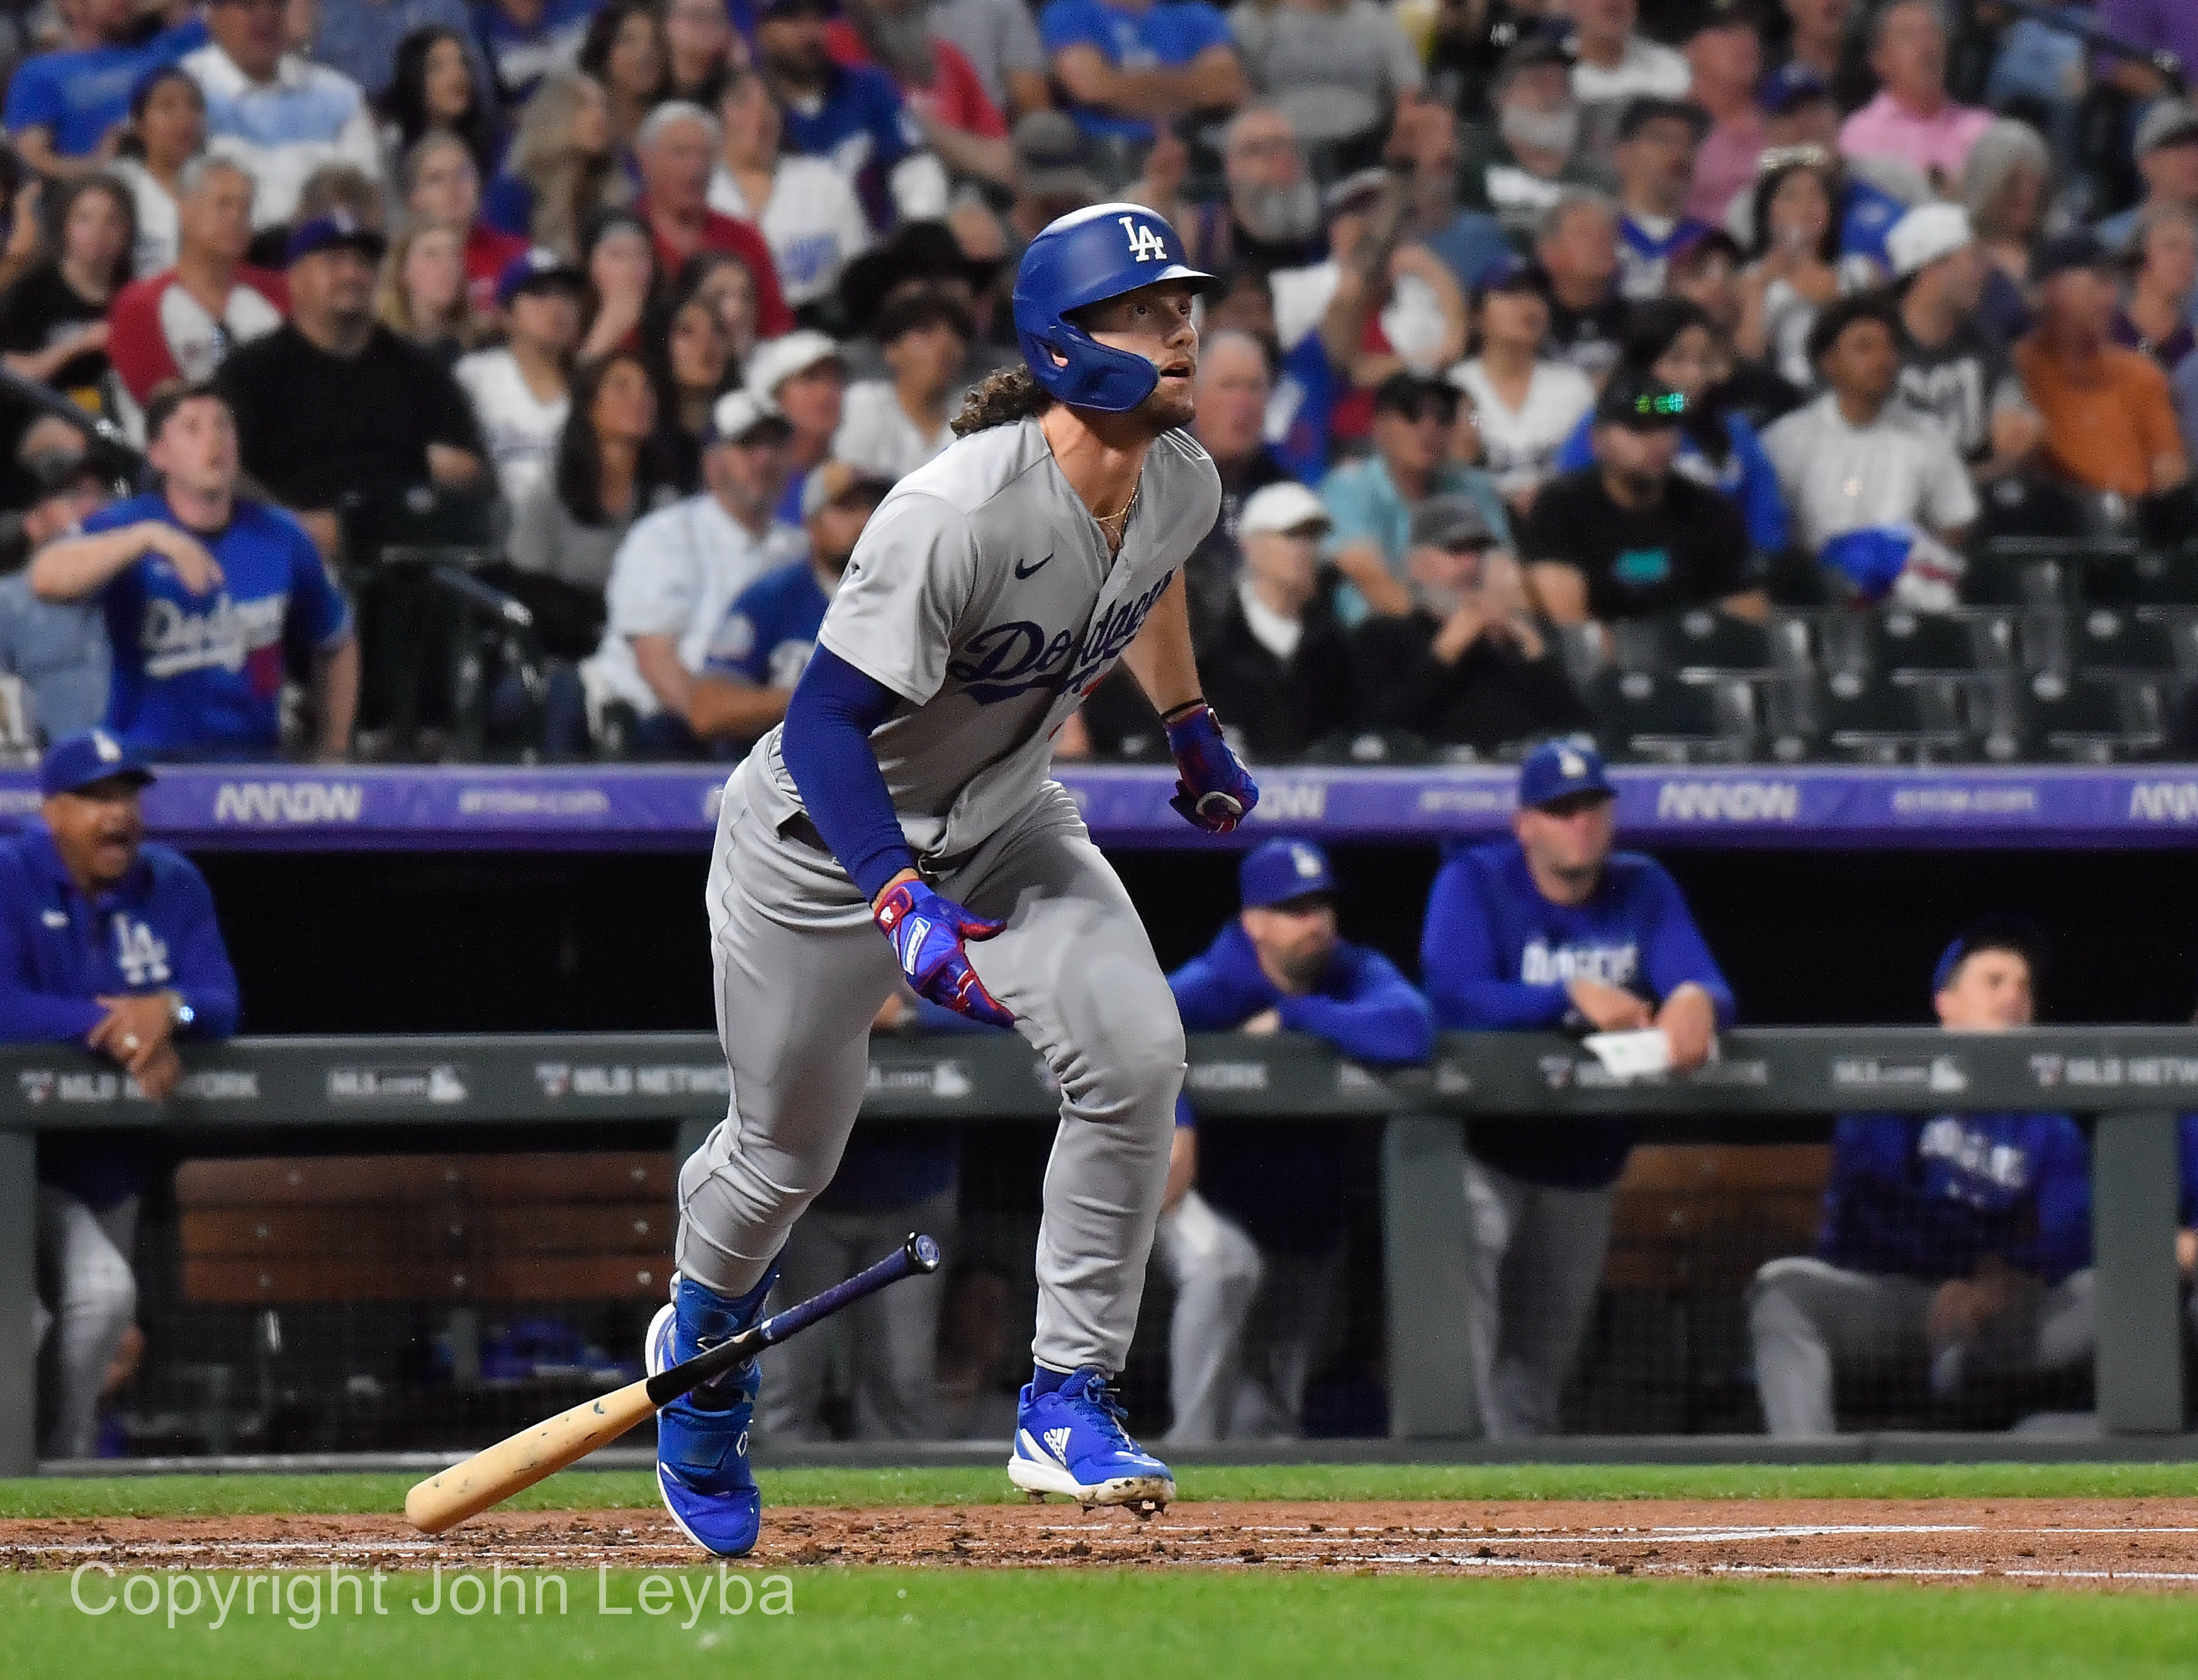 James Outman's offense blasts Dodgers past Rockies